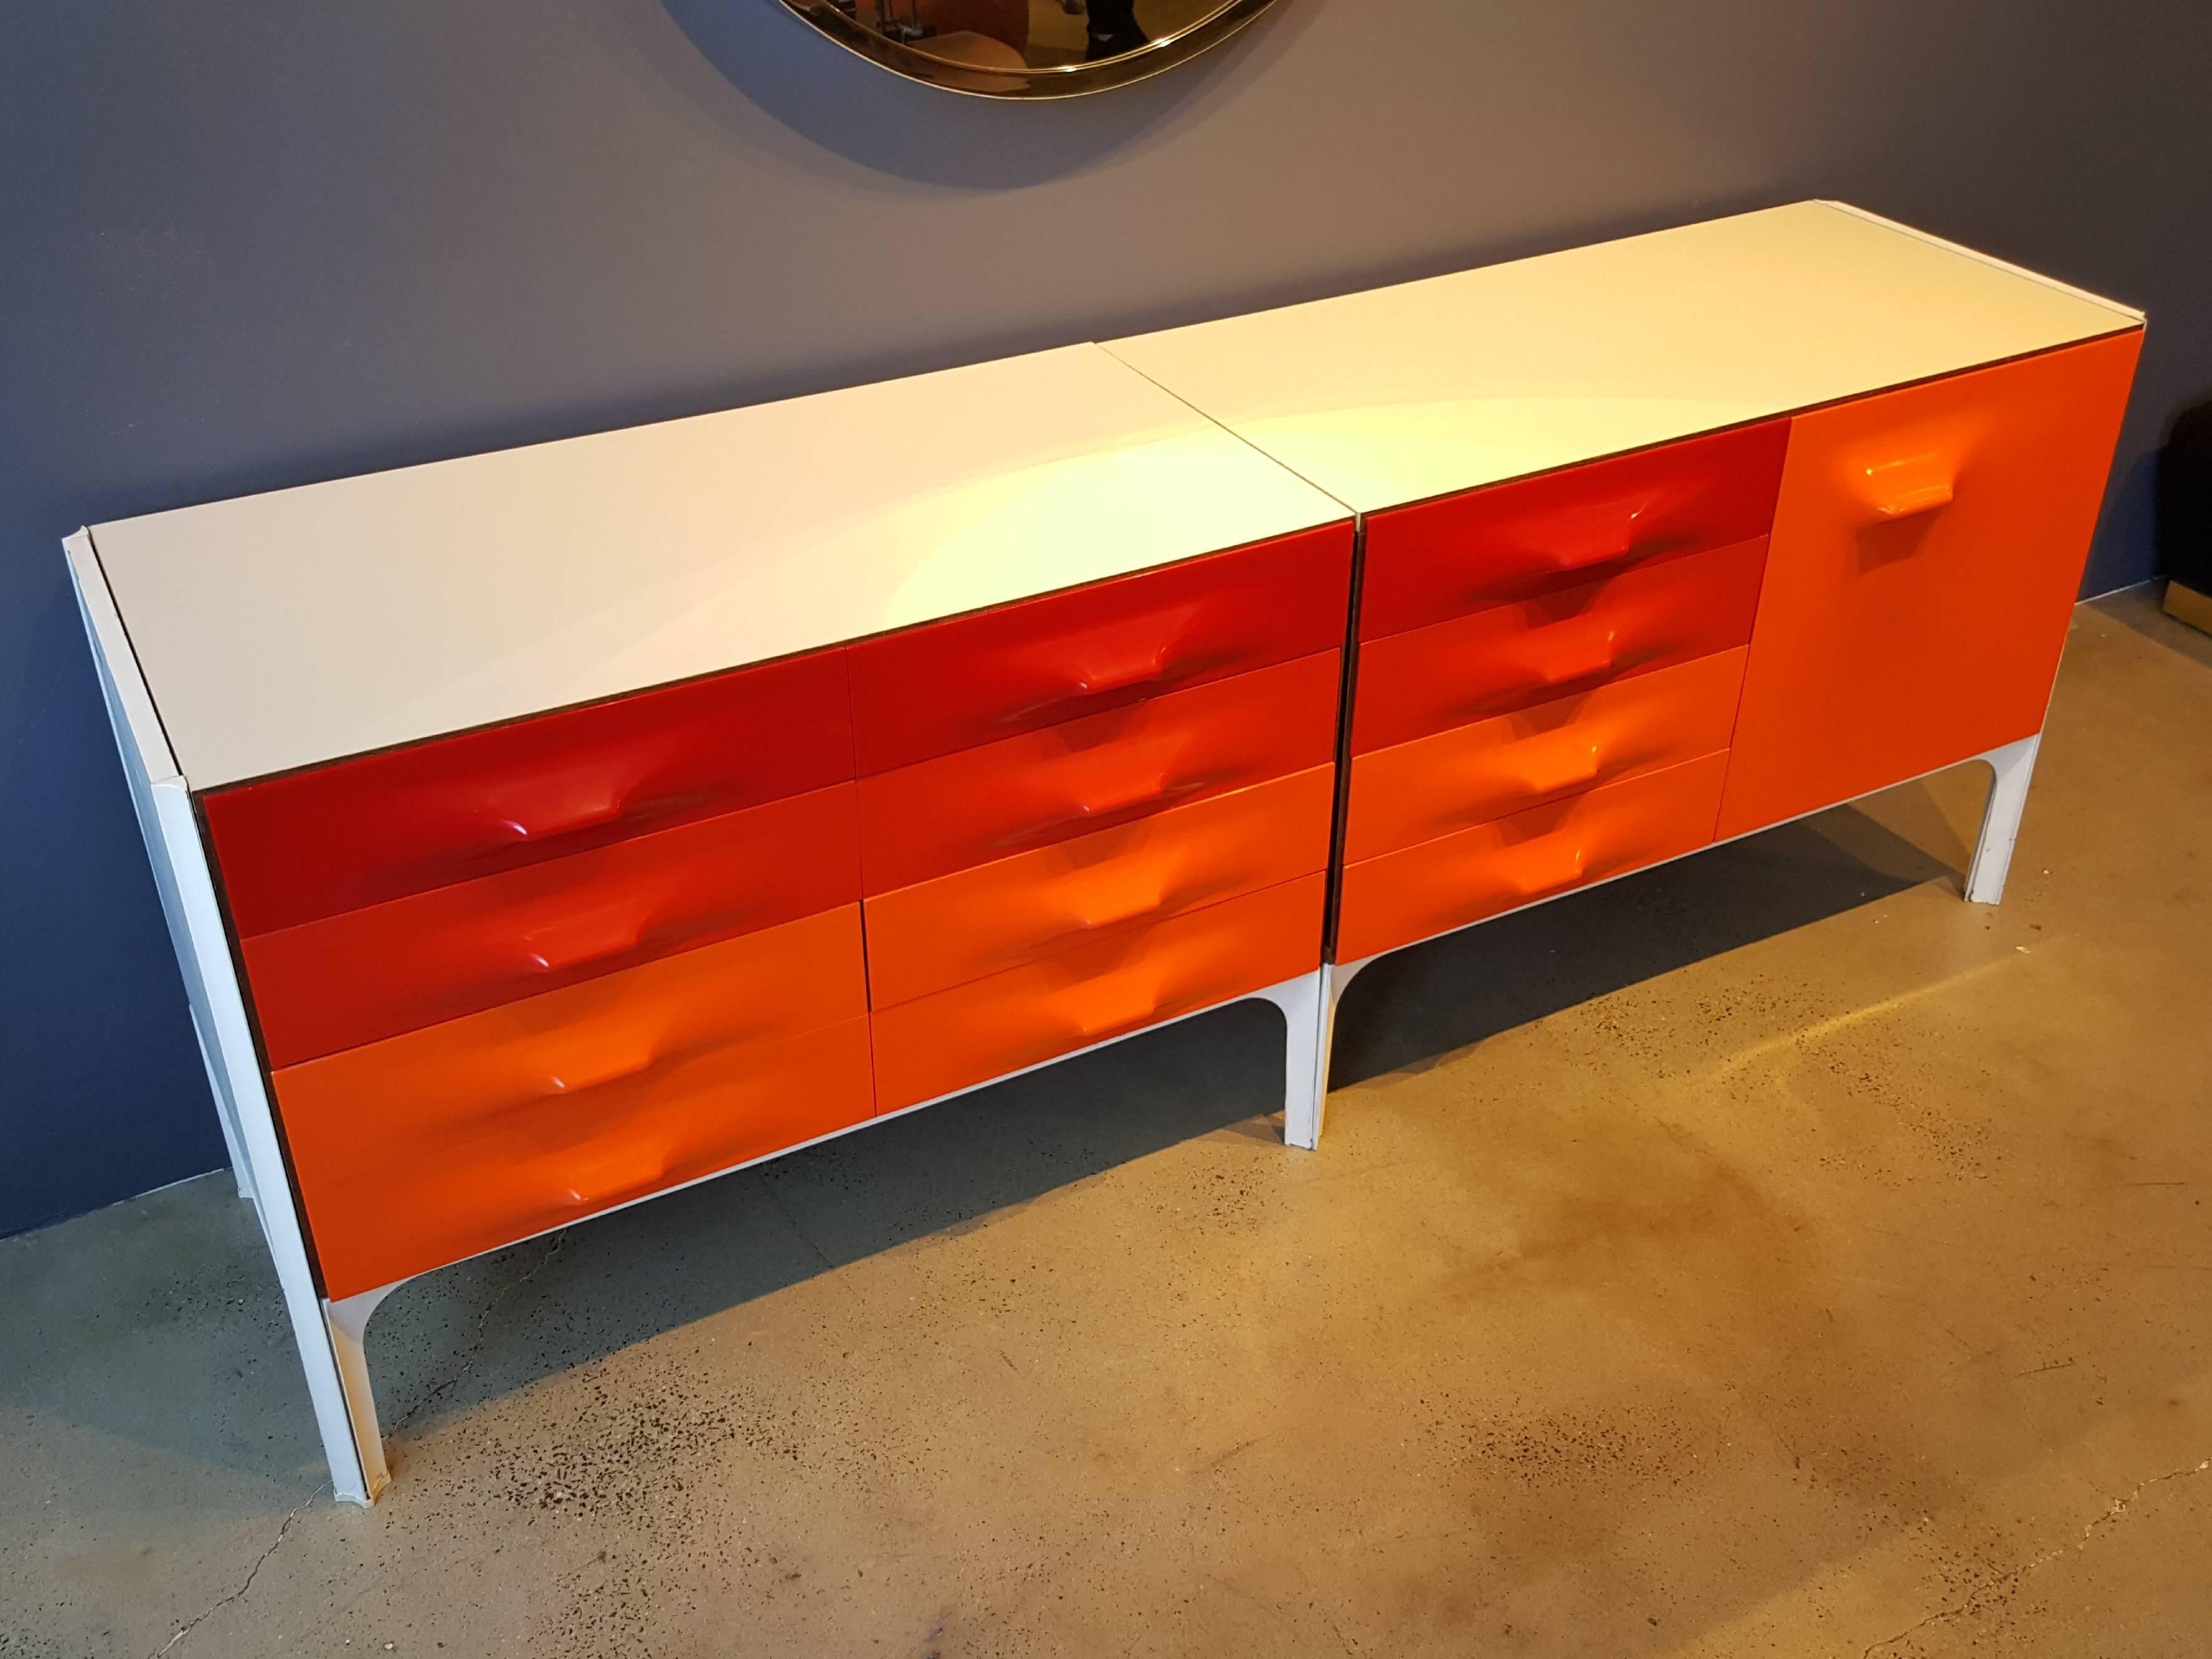 Very rare Raymond Loewy DF-2000 credenza for Doubinsky Frères, France. Hard to find piece, impactful space age design. Red and orange panels are in excellent condition and quite vivid. White laminate on top is clean and without stains or losses.